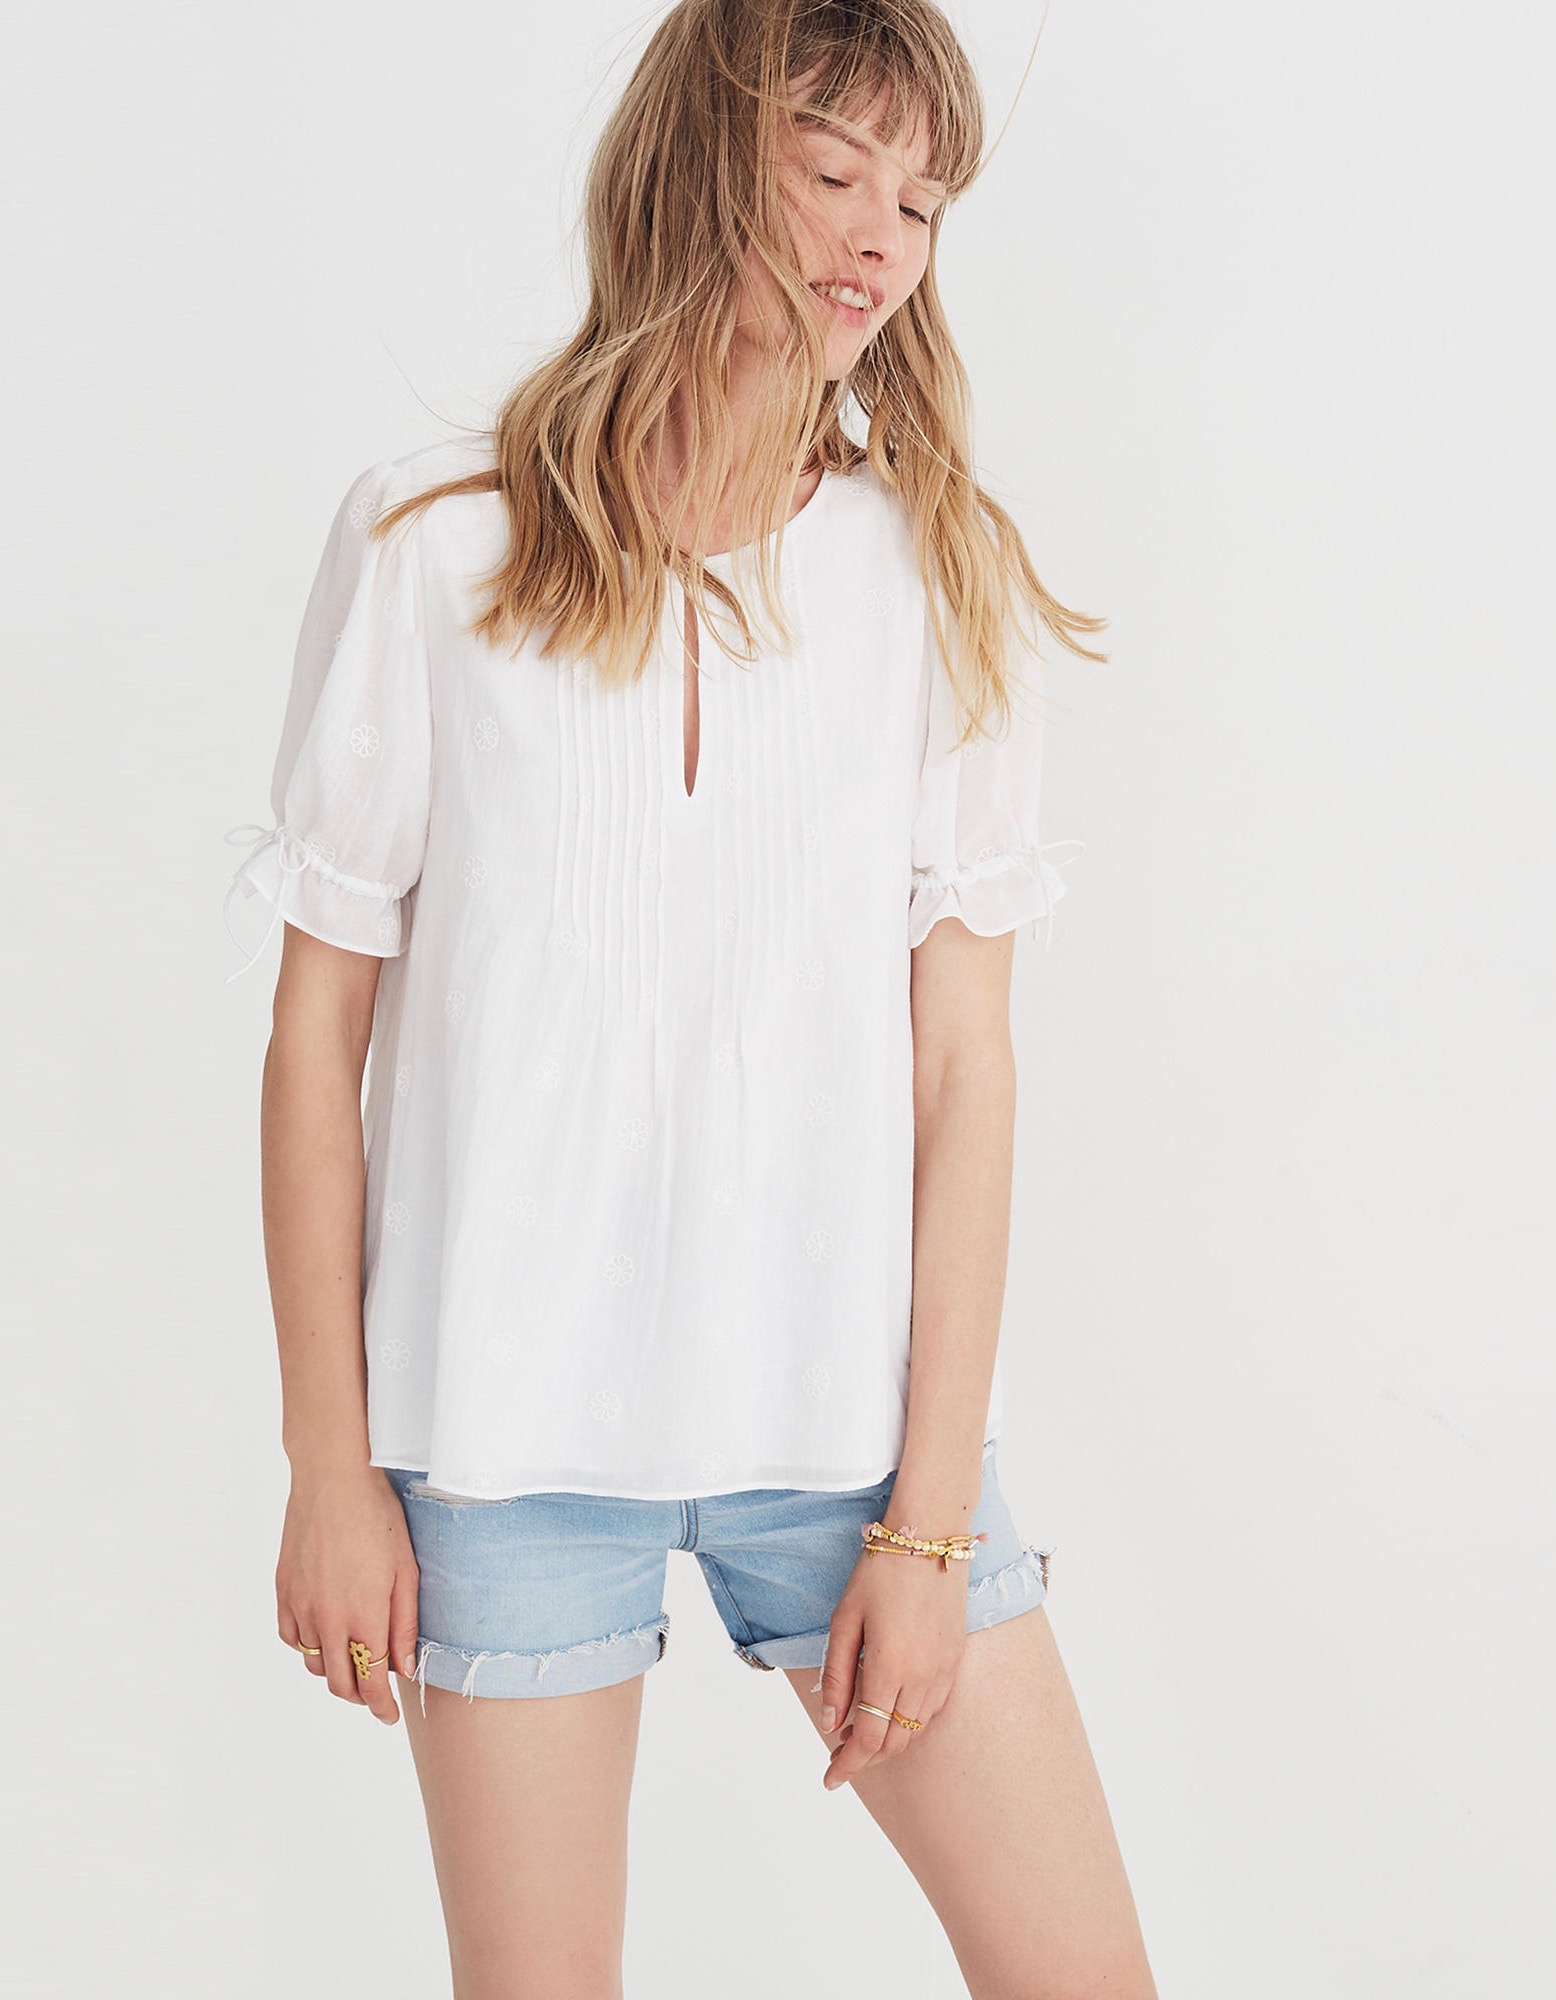 embroidered-pintuck-top-white-short-sleeve-madewell